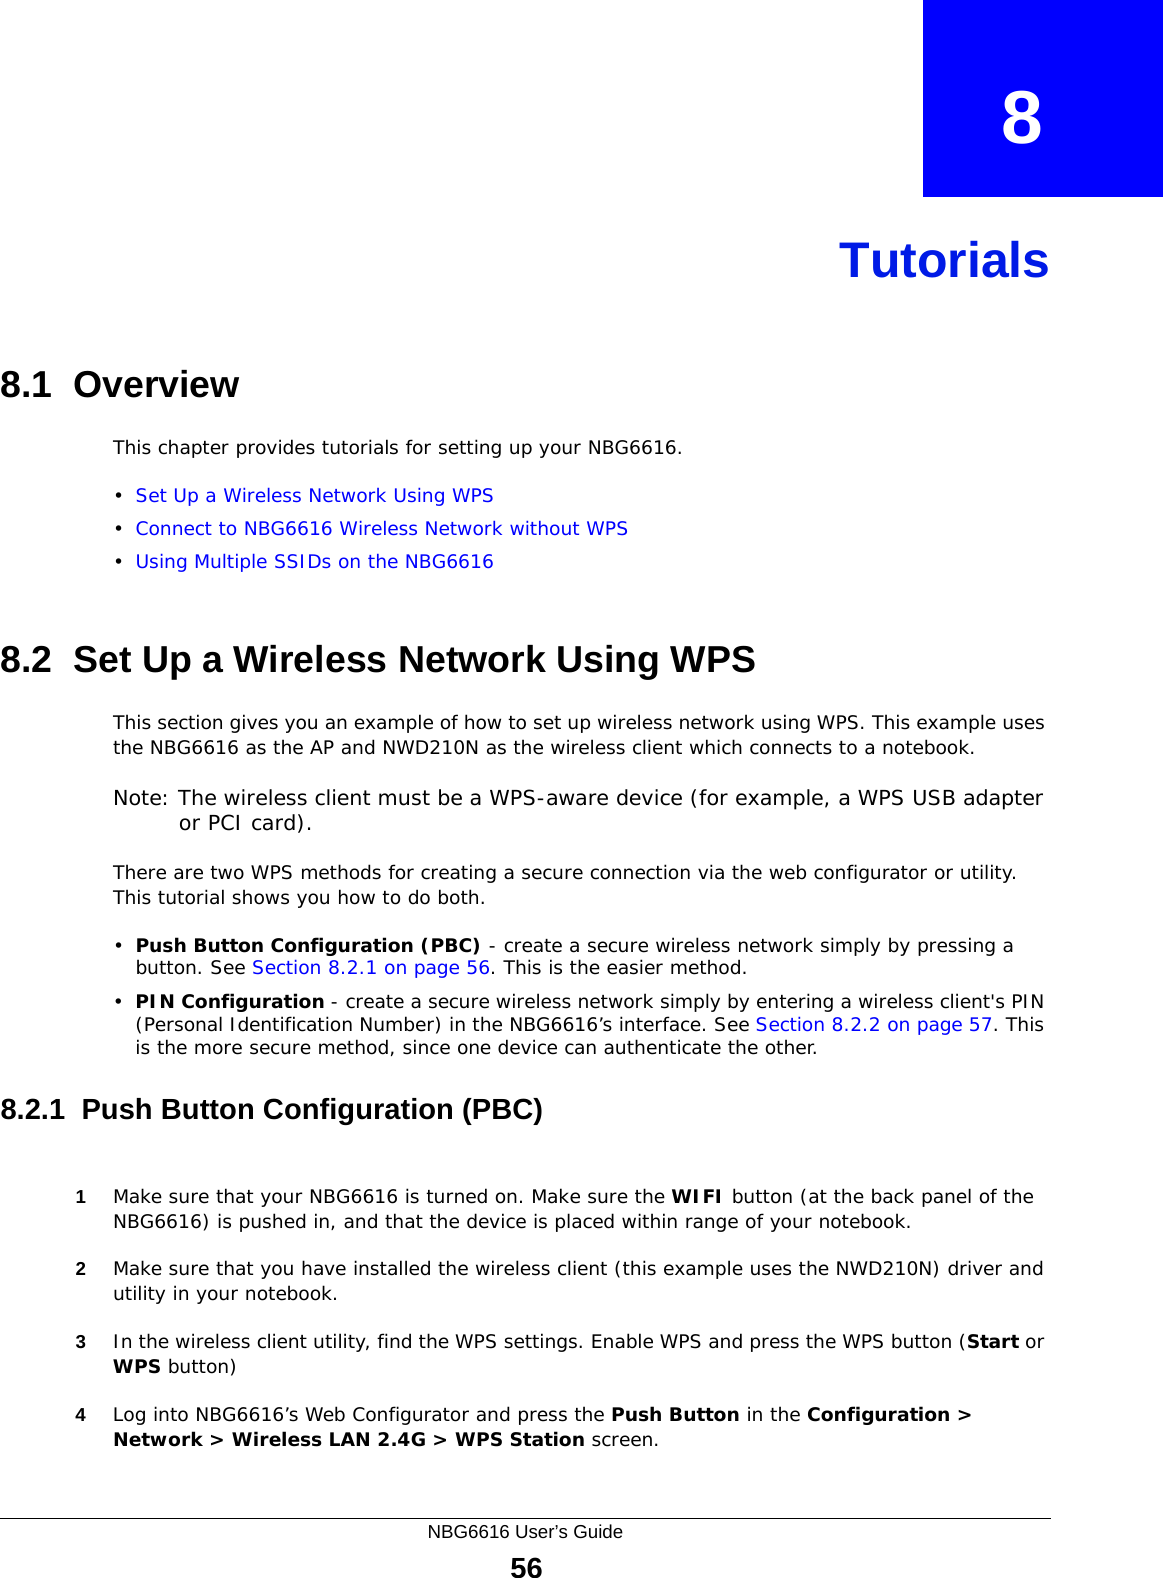 NBG6616 User’s Guide56CHAPTER   8Tutorials8.1  OverviewThis chapter provides tutorials for setting up your NBG6616.•Set Up a Wireless Network Using WPS•Connect to NBG6616 Wireless Network without WPS•Using Multiple SSIDs on the NBG66168.2  Set Up a Wireless Network Using WPSThis section gives you an example of how to set up wireless network using WPS. This example uses the NBG6616 as the AP and NWD210N as the wireless client which connects to a notebook. Note: The wireless client must be a WPS-aware device (for example, a WPS USB adapter or PCI card).There are two WPS methods for creating a secure connection via the web configurator or utility. This tutorial shows you how to do both.•Push Button Configuration (PBC) - create a secure wireless network simply by pressing a button. See Section 8.2.1 on page 56. This is the easier method.•PIN Configuration - create a secure wireless network simply by entering a wireless client&apos;s PIN (Personal Identification Number) in the NBG6616’s interface. See Section 8.2.2 on page 57. This is the more secure method, since one device can authenticate the other.8.2.1  Push Button Configuration (PBC)1Make sure that your NBG6616 is turned on. Make sure the WIFI button (at the back panel of the NBG6616) is pushed in, and that the device is placed within range of your notebook. 2Make sure that you have installed the wireless client (this example uses the NWD210N) driver and utility in your notebook.3In the wireless client utility, find the WPS settings. Enable WPS and press the WPS button (Start or WPS button)4Log into NBG6616’s Web Configurator and press the Push Button in the Configuration &gt; Network &gt; Wireless LAN 2.4G &gt; WPS Station screen. 